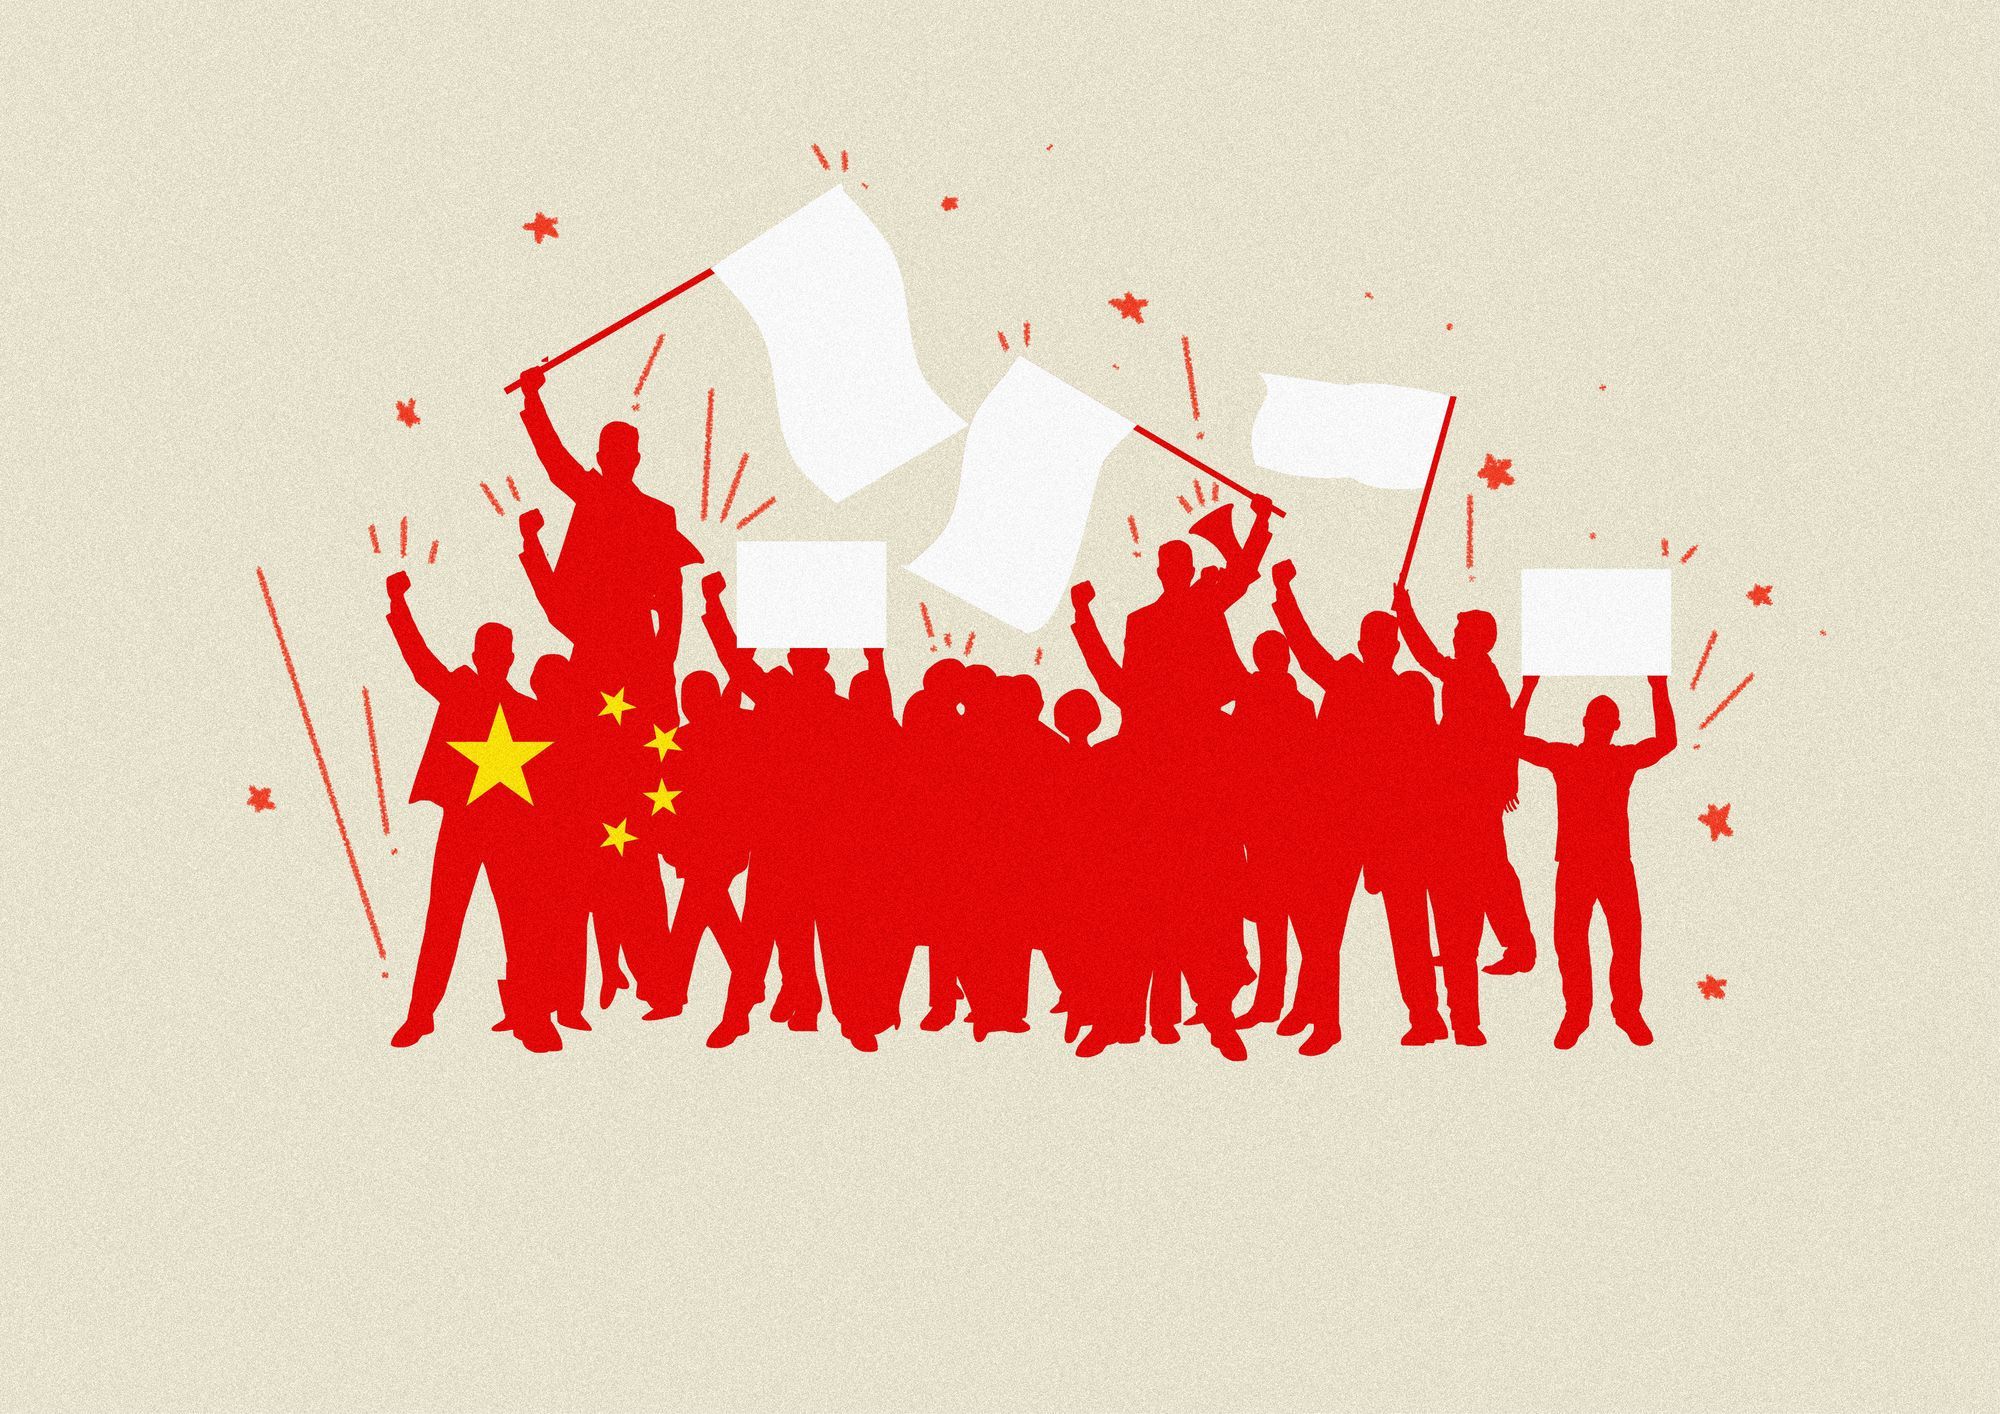 Protests in China not seen in decades